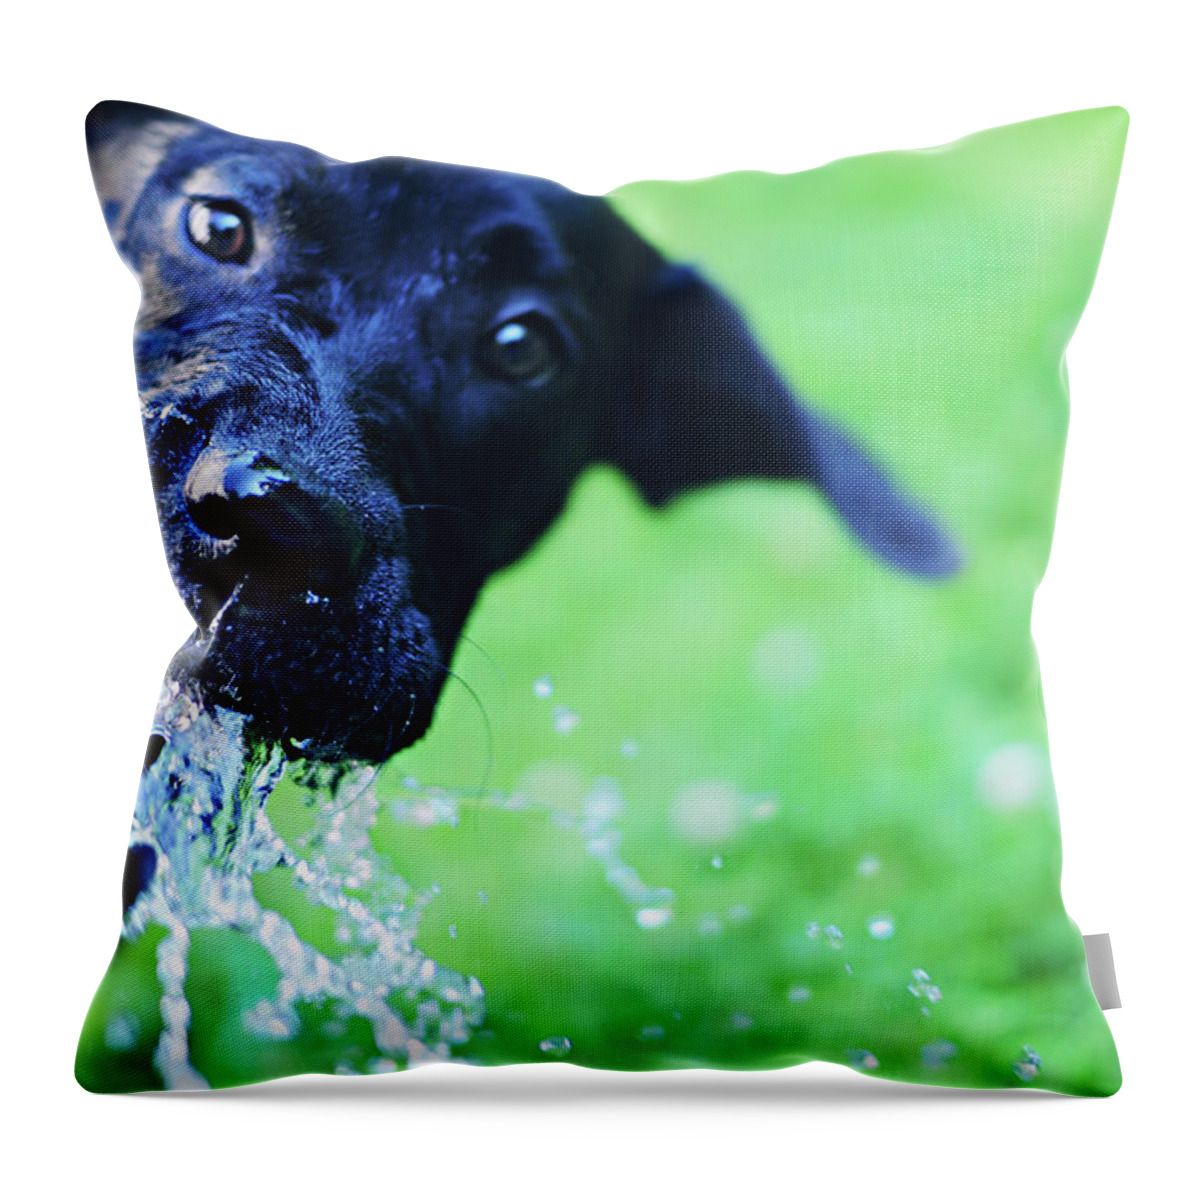 Pets Throw Pillow featuring the photograph Dog Drinking From A Water Hose by Crissy Kight / Www.dearcrissy.com